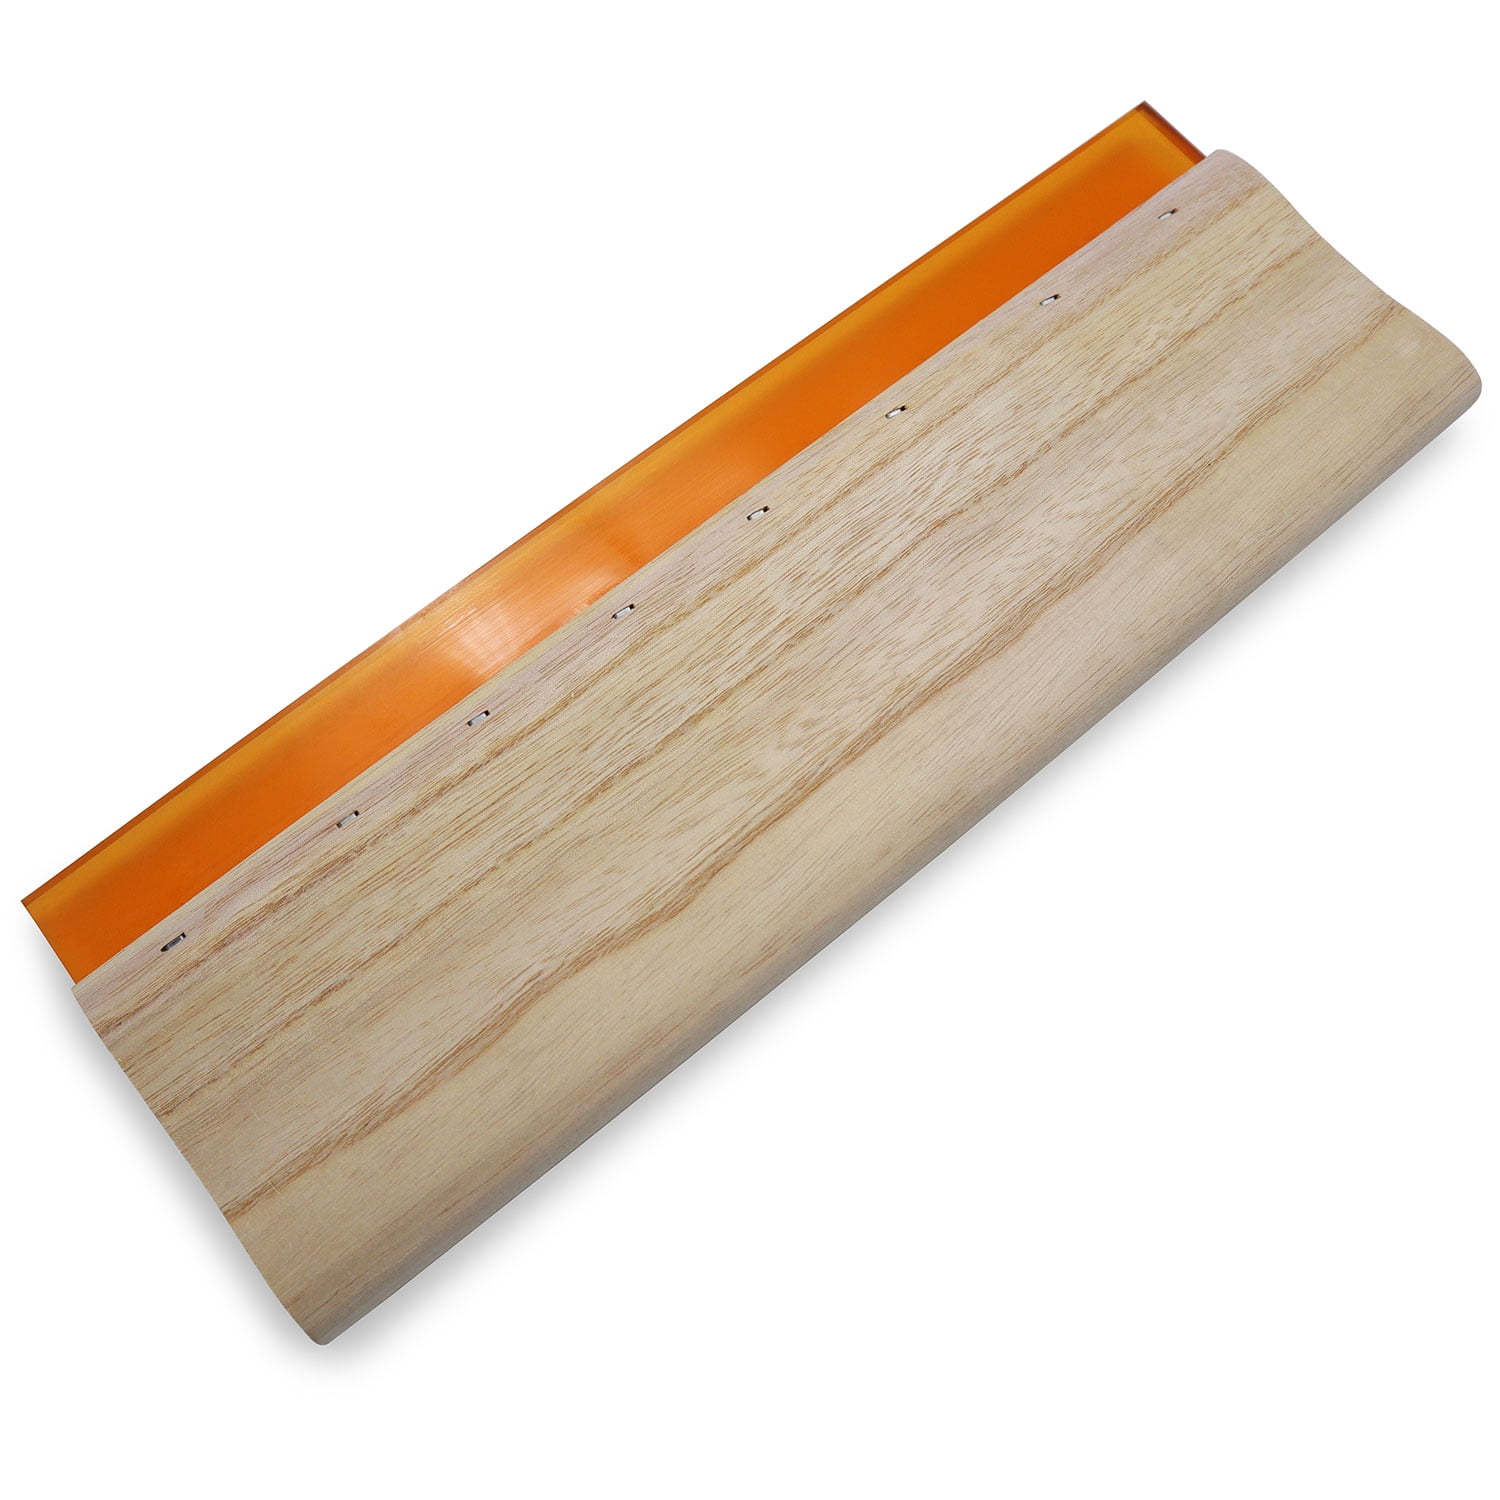 6 PCS 13" Oiliness Screen Printing Squeegee Ink scaper Wood Material 75 duro 